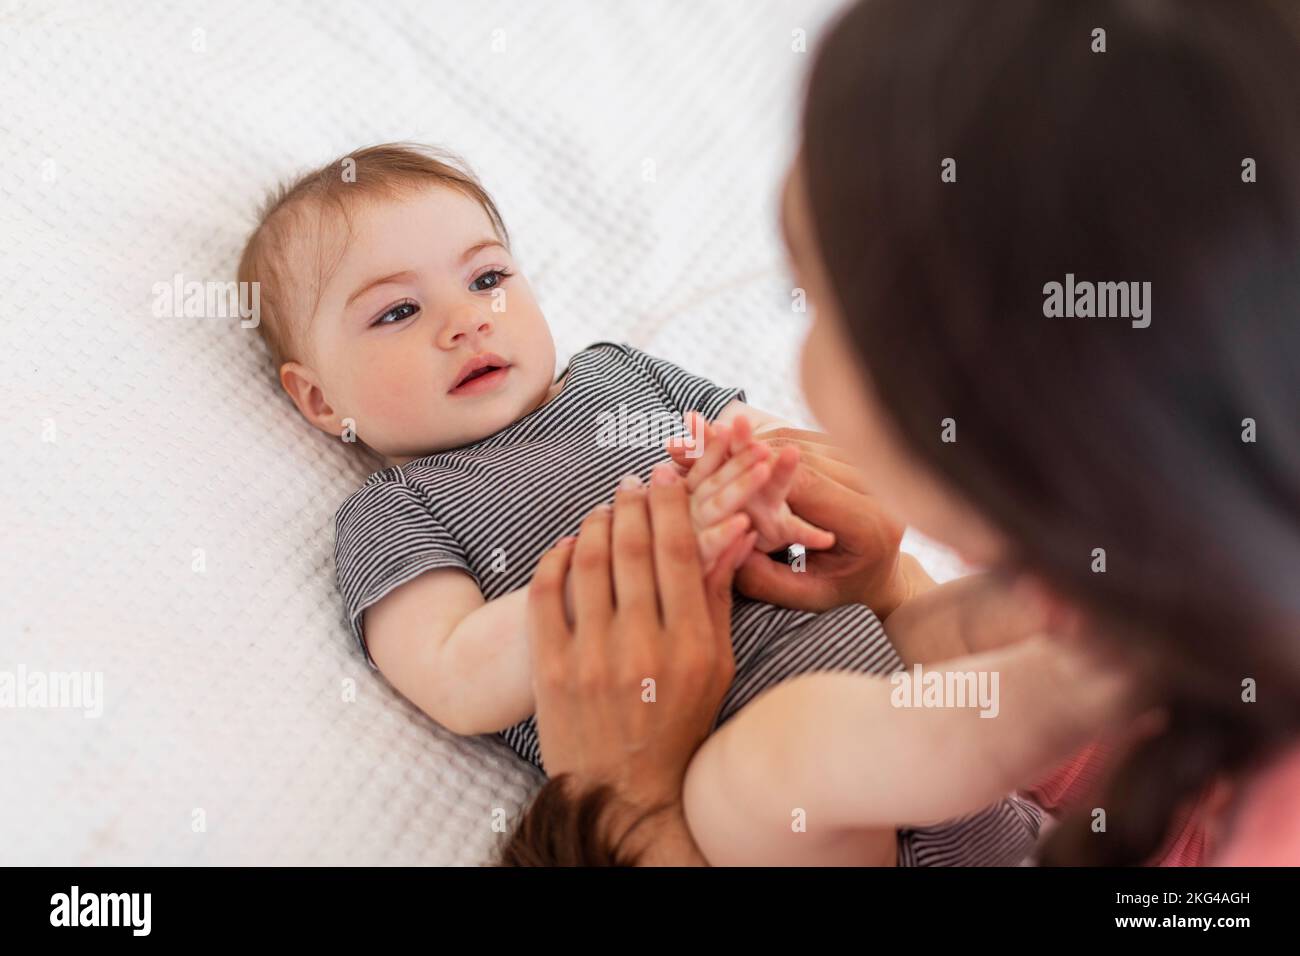 Good morning sunshine. Adorable little baby lying on bed and looking at mother, caring mom holding child's hands Stock Photo